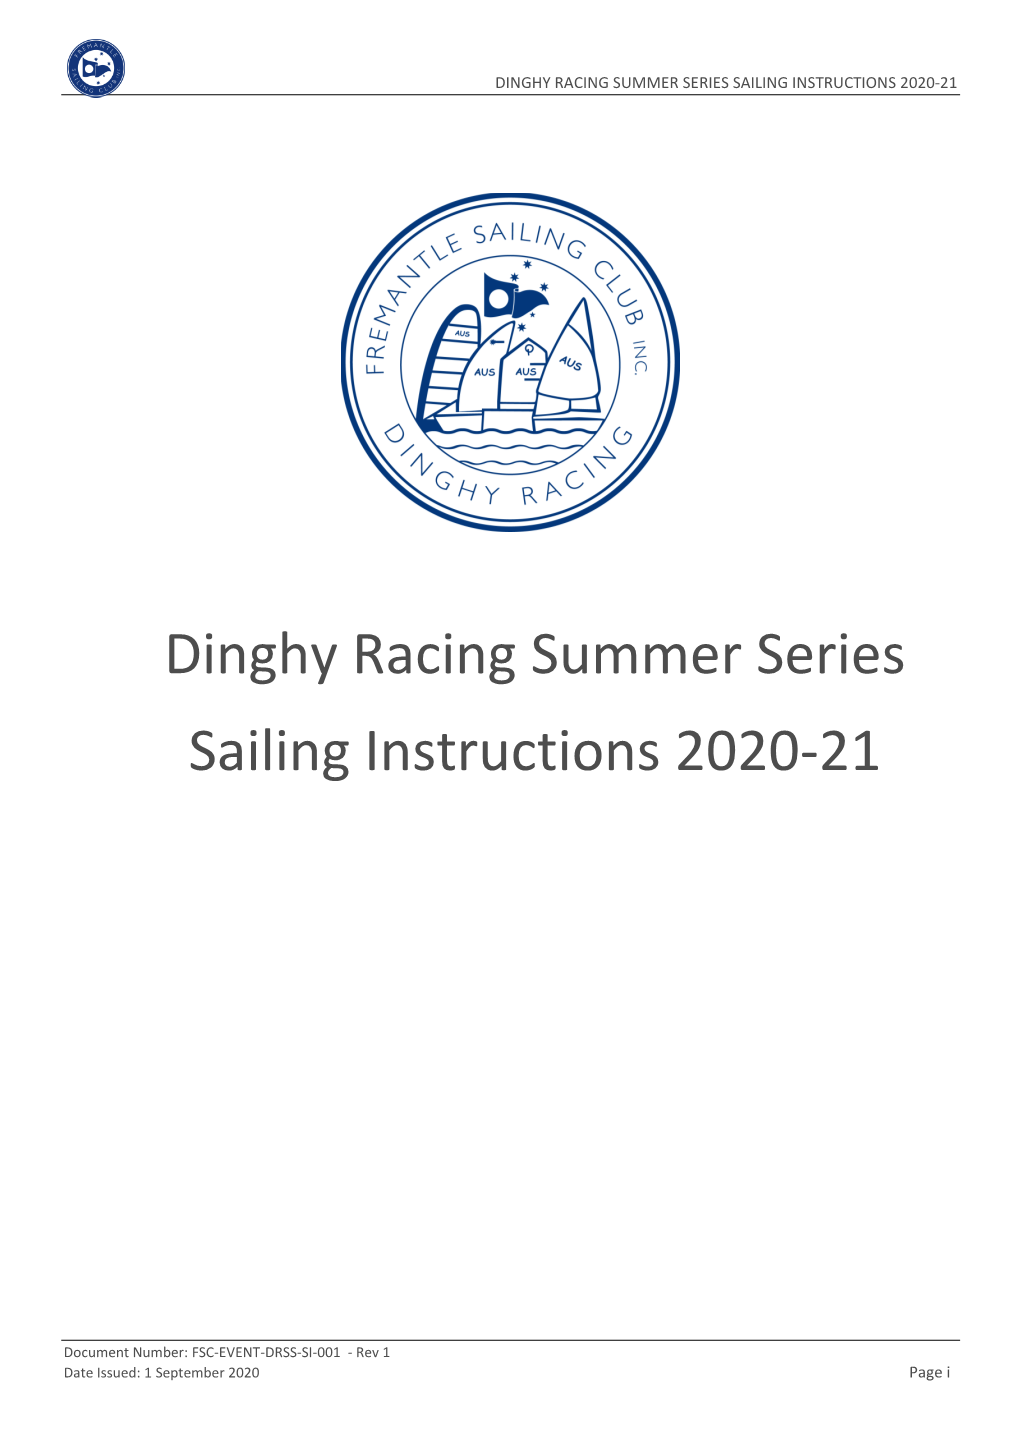 Dinghy Racing Summer Series Sailing Instructions 2020-21